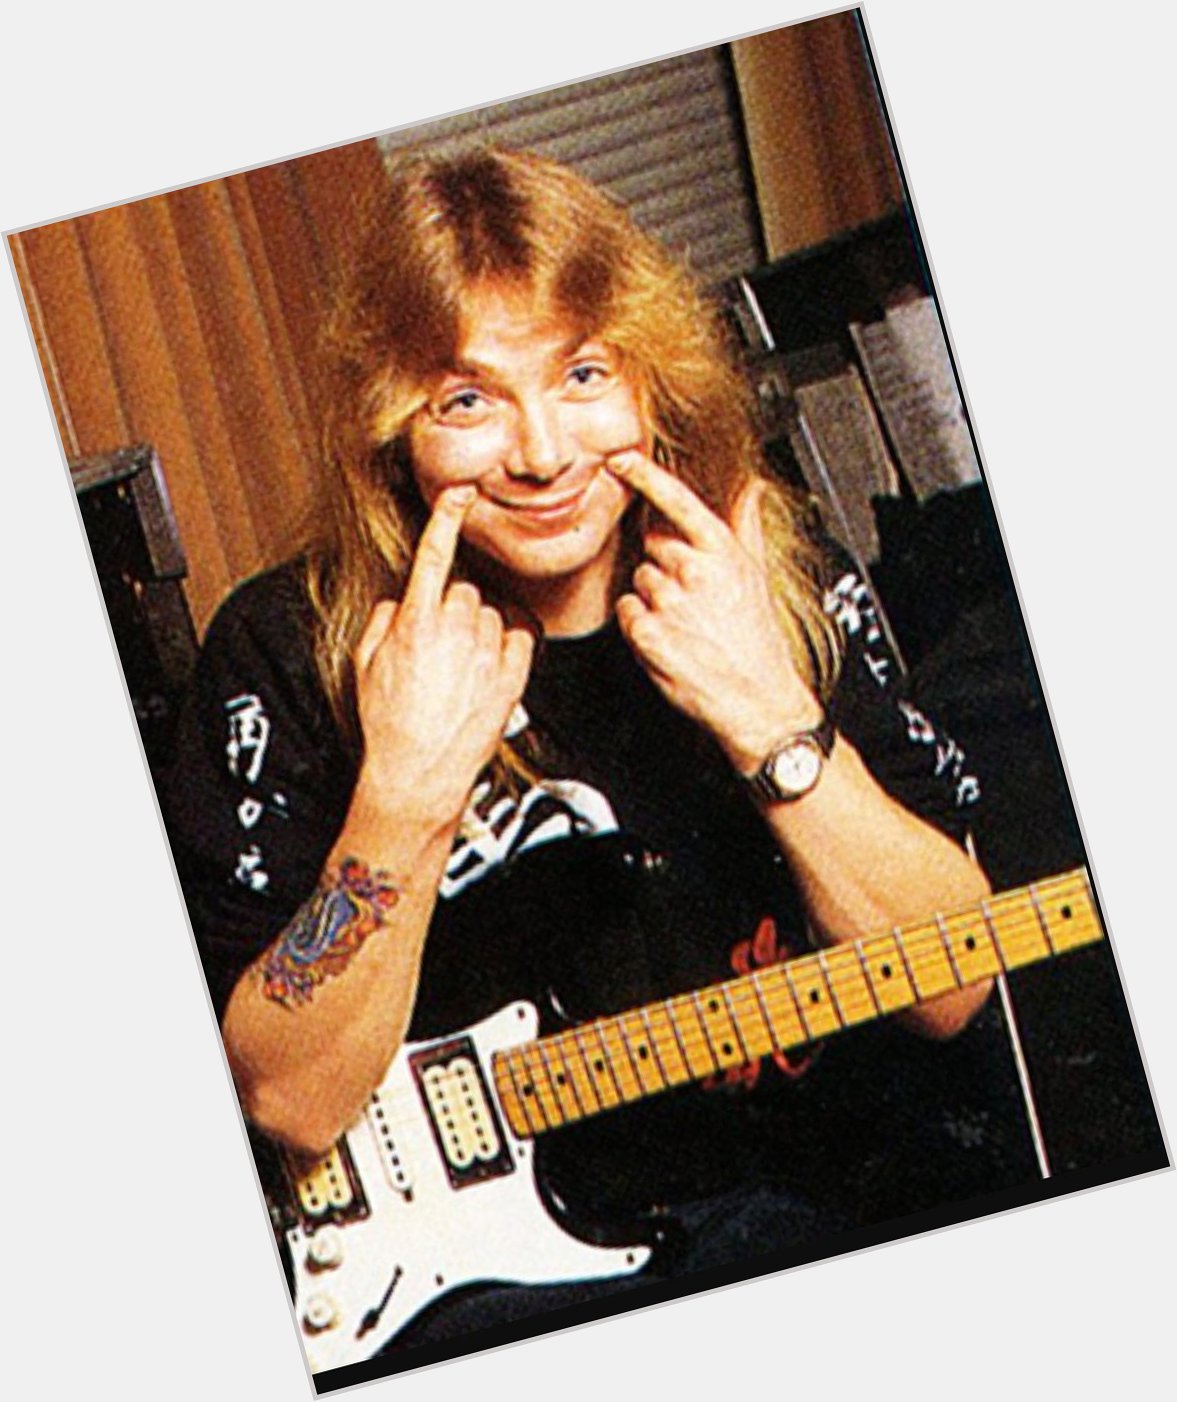 One day late, but Happy birthday to you, Our God, Dave Murray. 